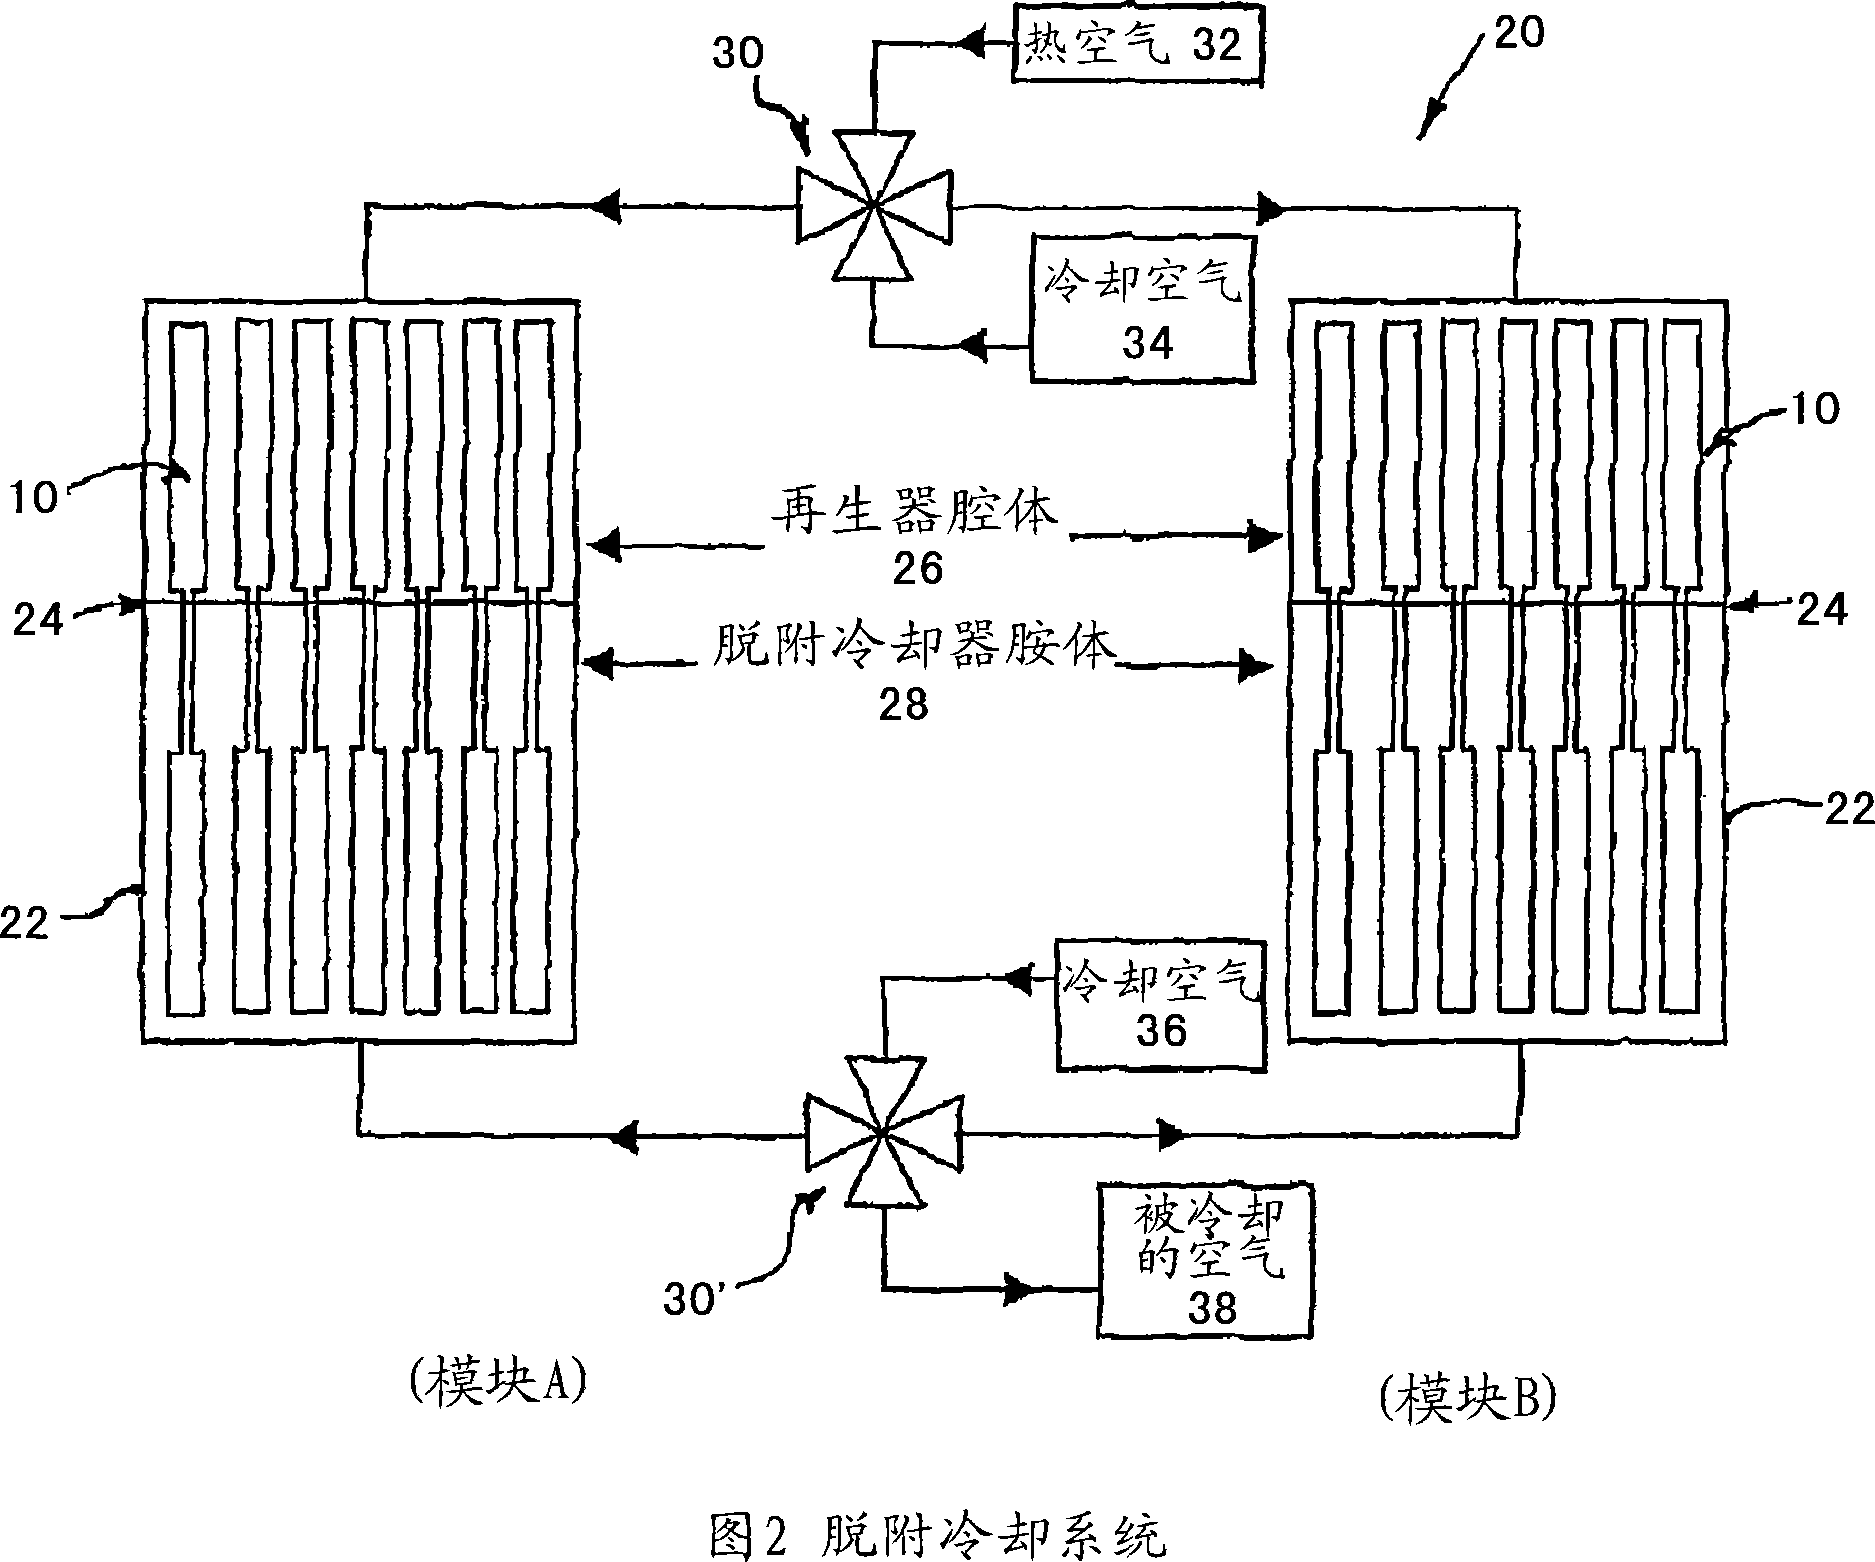 Method, apparatus and system for transferring heat